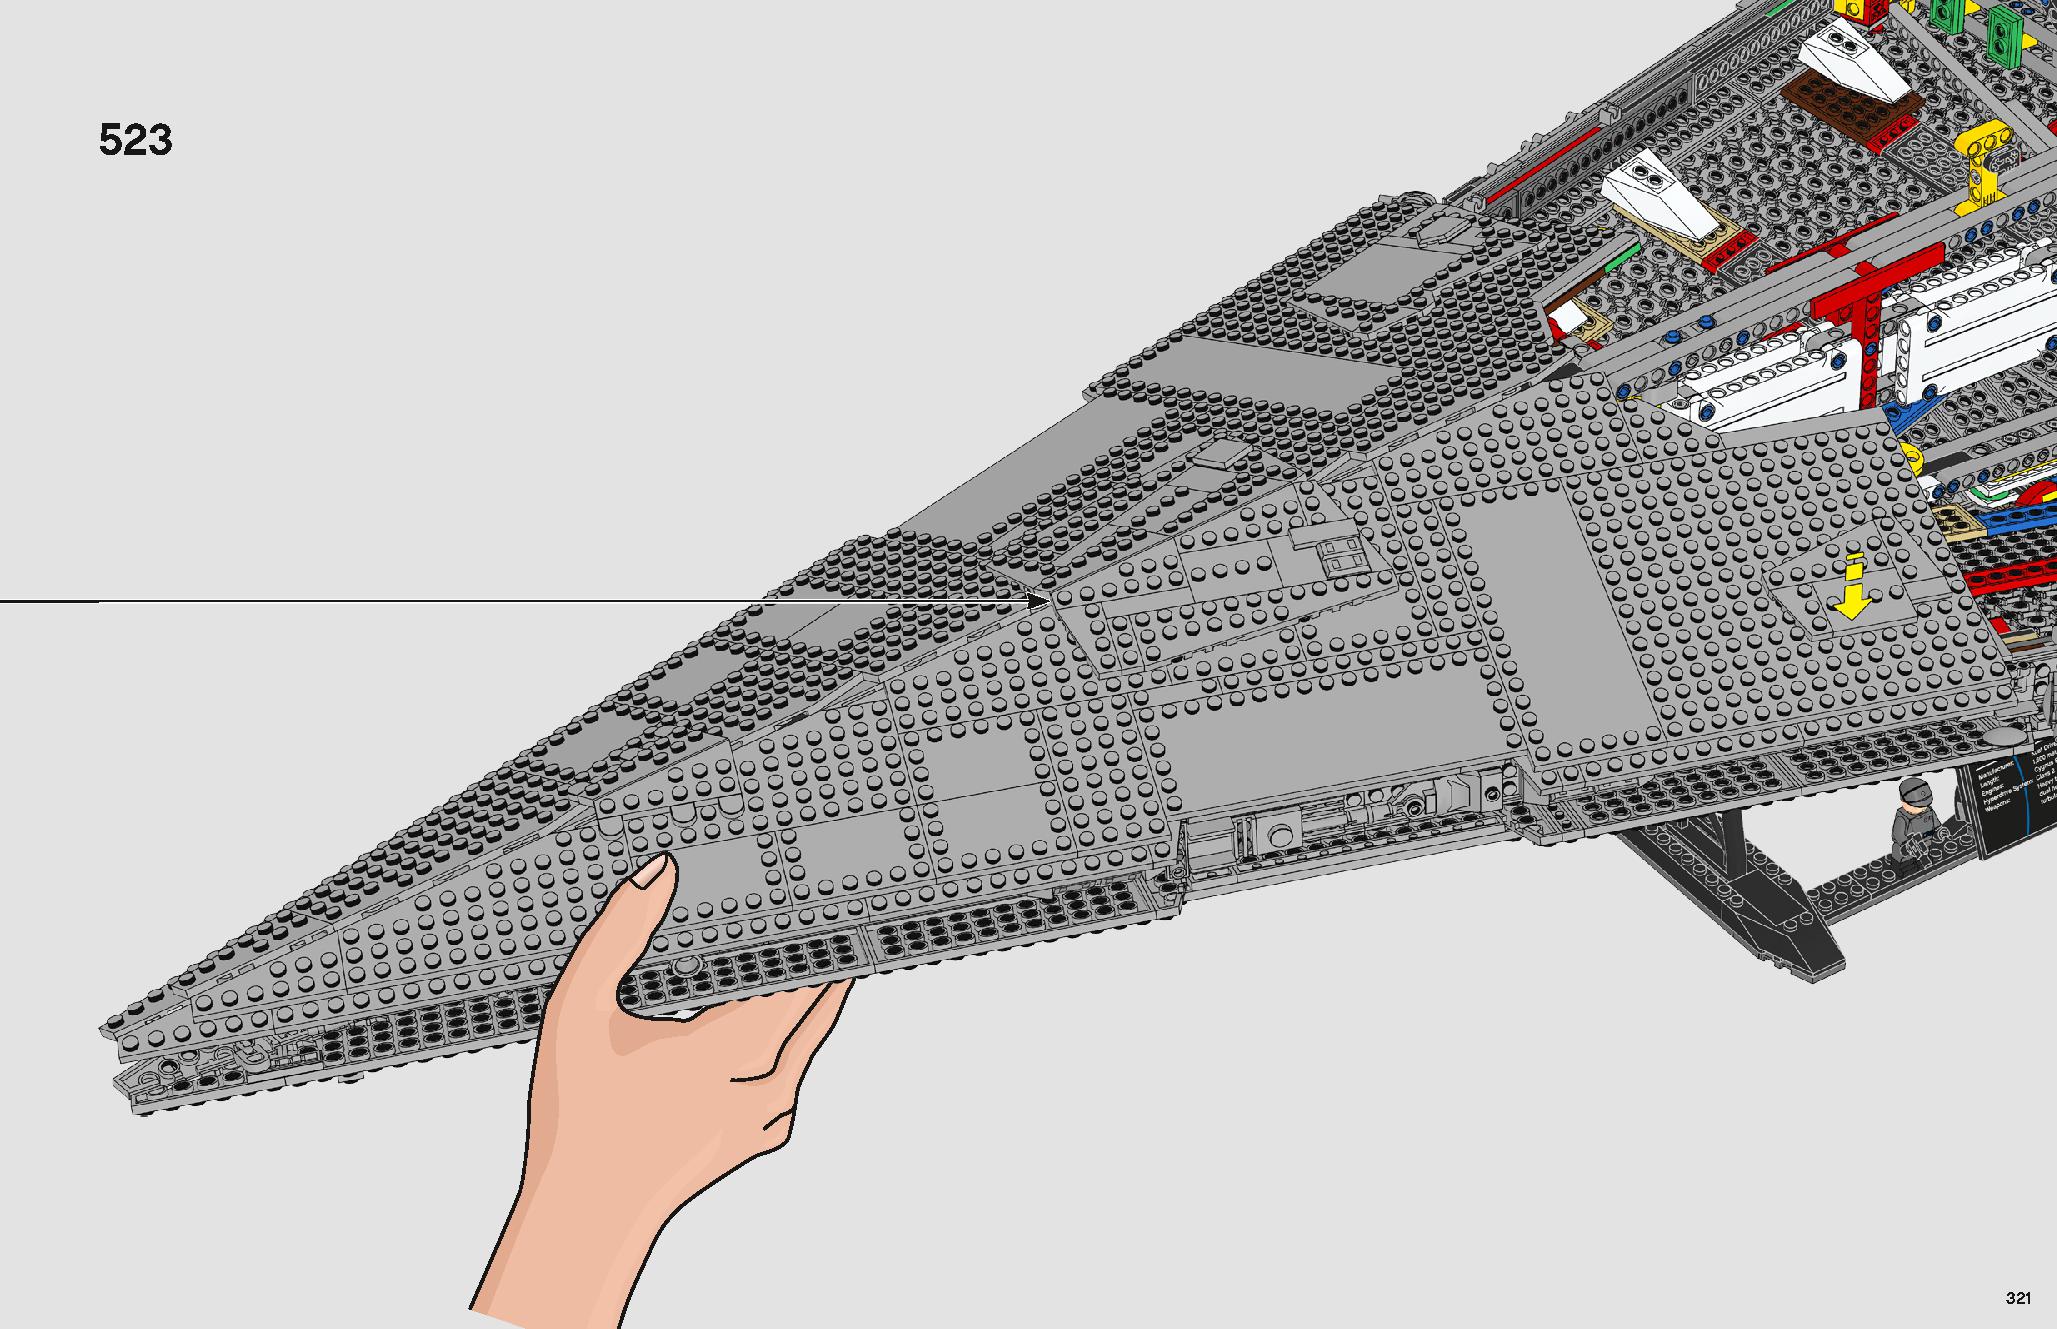 Imperial Star Destroyer 75252 レゴの商品情報 レゴの説明書・組立方法 321 page